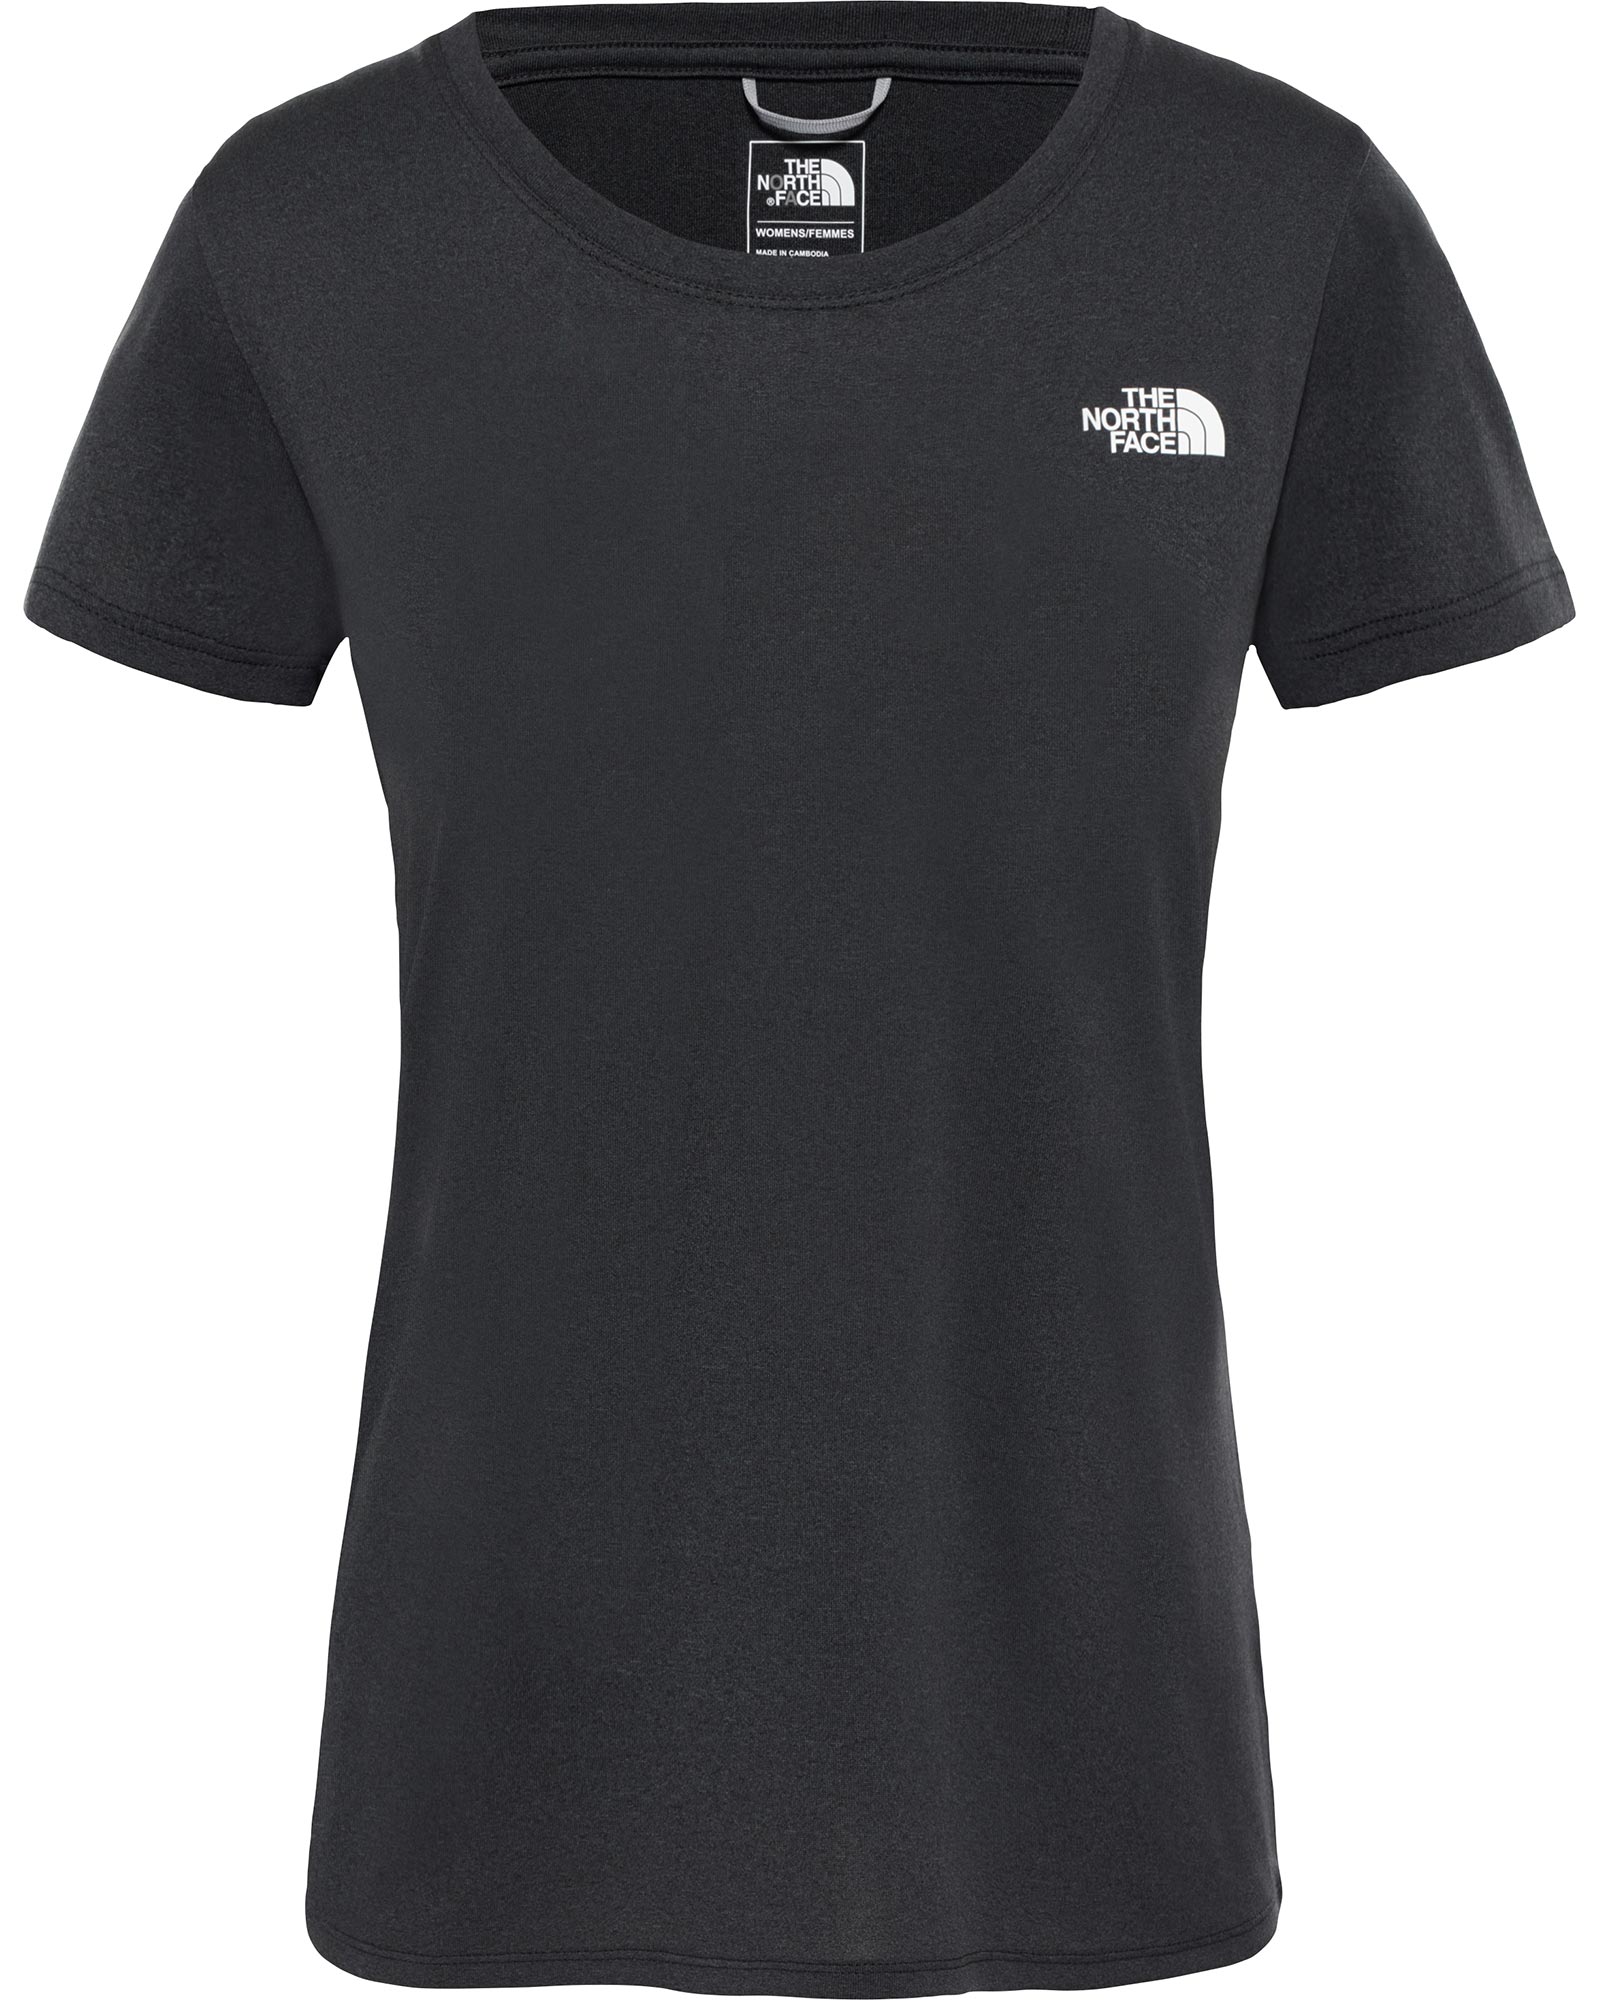 The North Face Reaxion Amp Women’s Crew T Shirt - TNF Light Grey Heather S